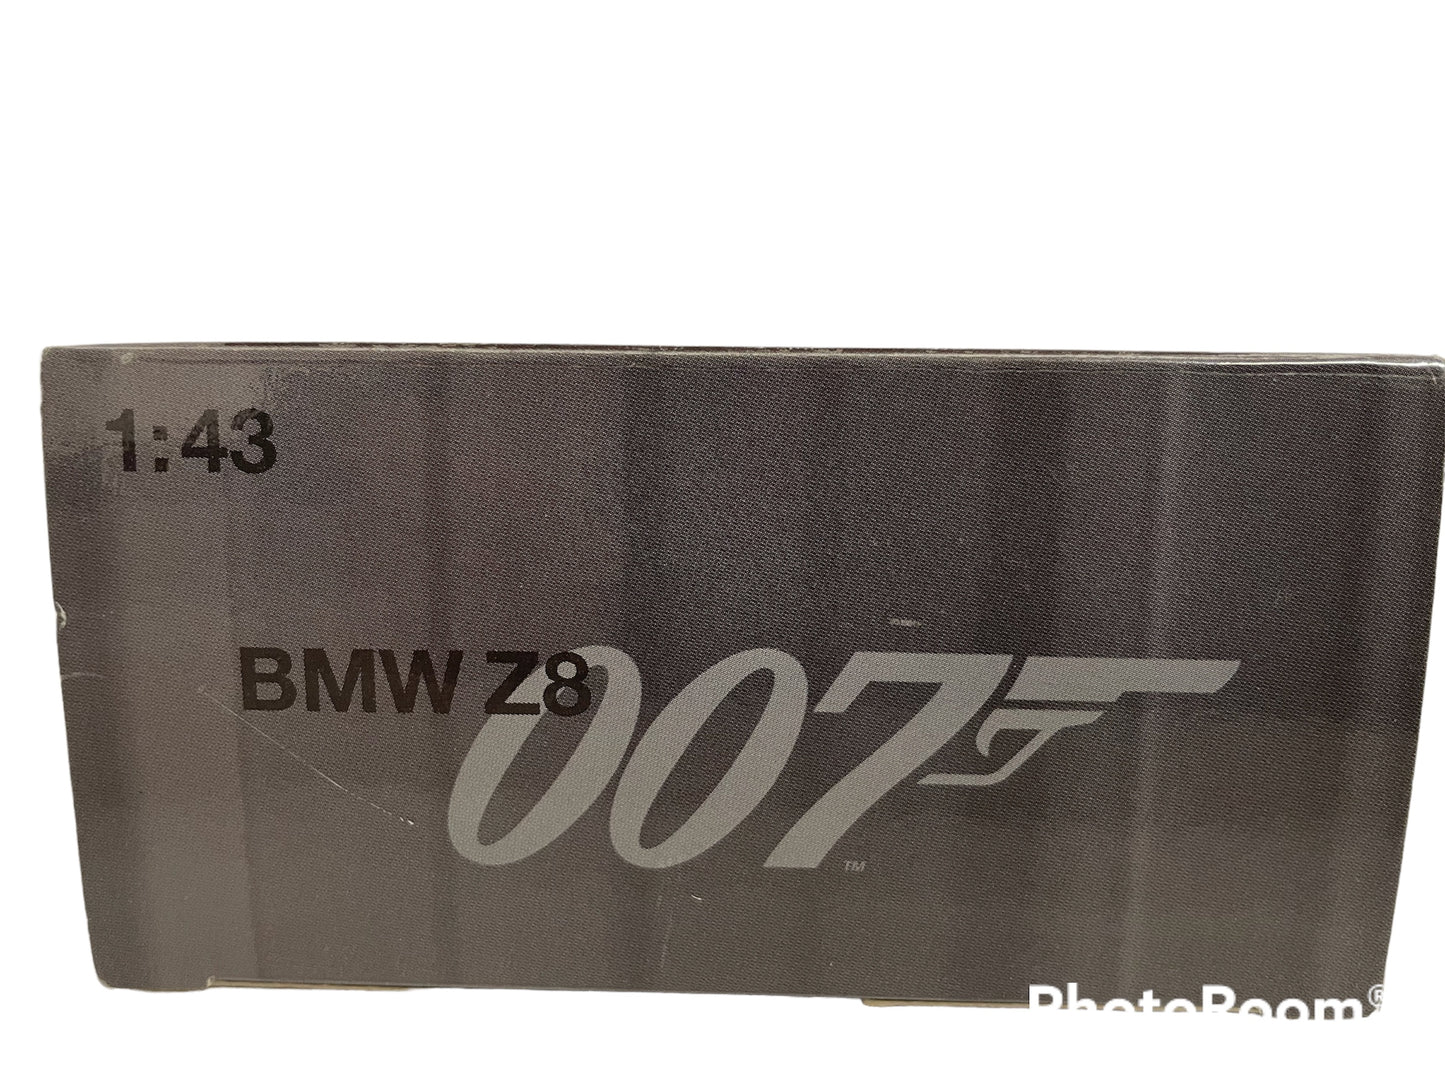 Vintage 1999 James 007 Bond The World Is Not Enough - Collectors Model - BM Z8 1:43 Scale Die-Cast W Car Vehicle Replica Model 1999 Edition On Fold Open Display Plinth